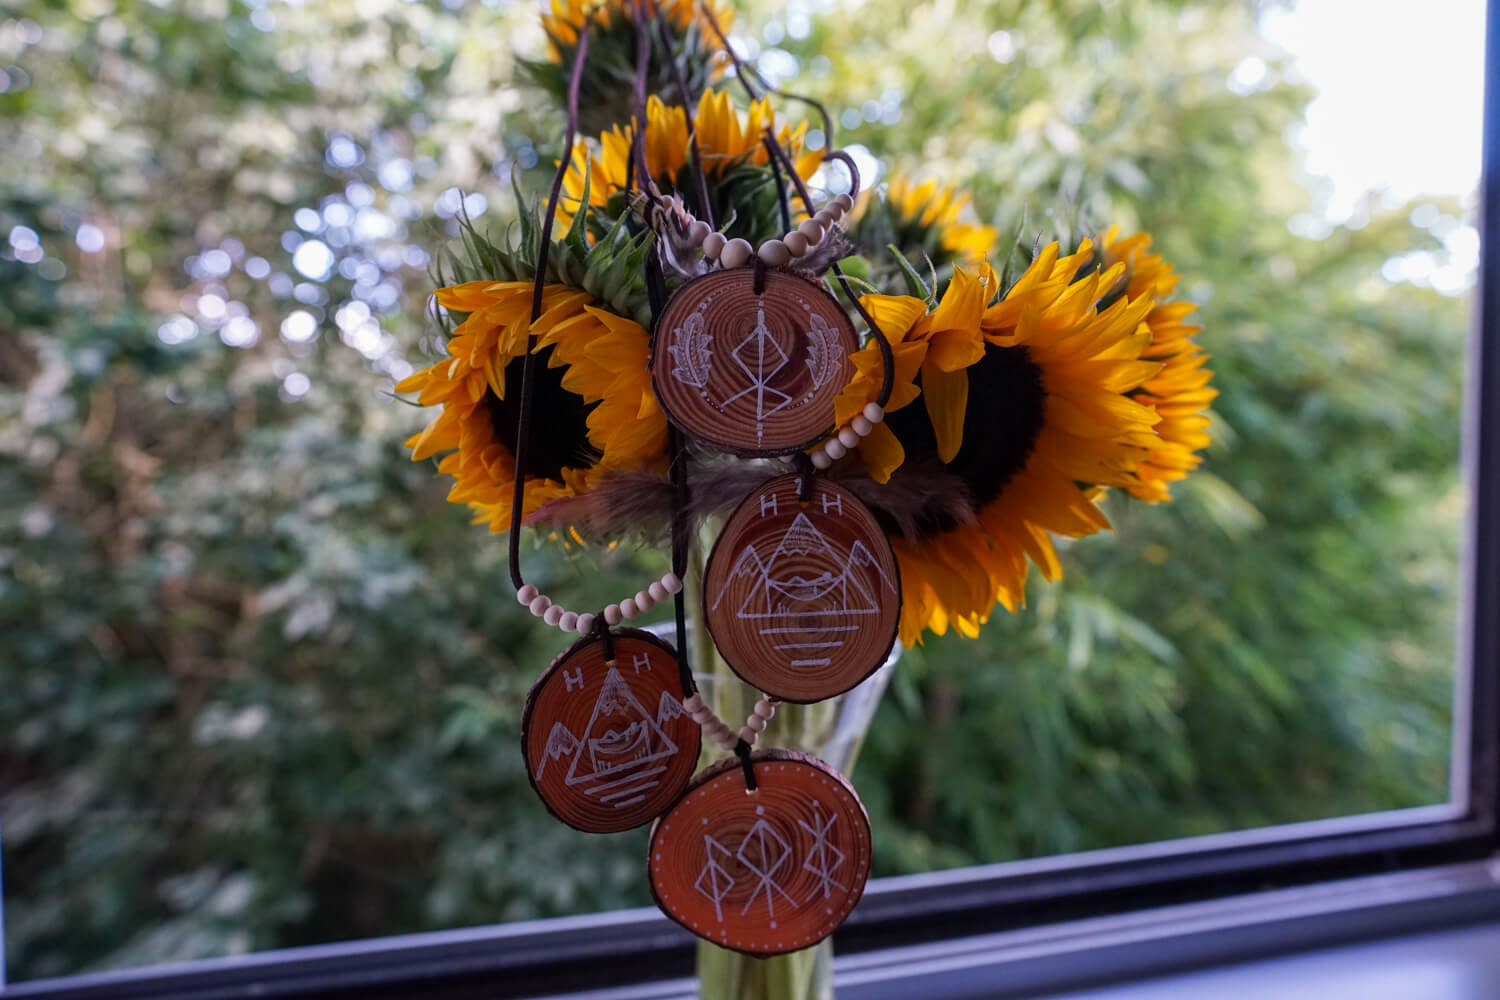 sunflowers with wooden necklaces hanging